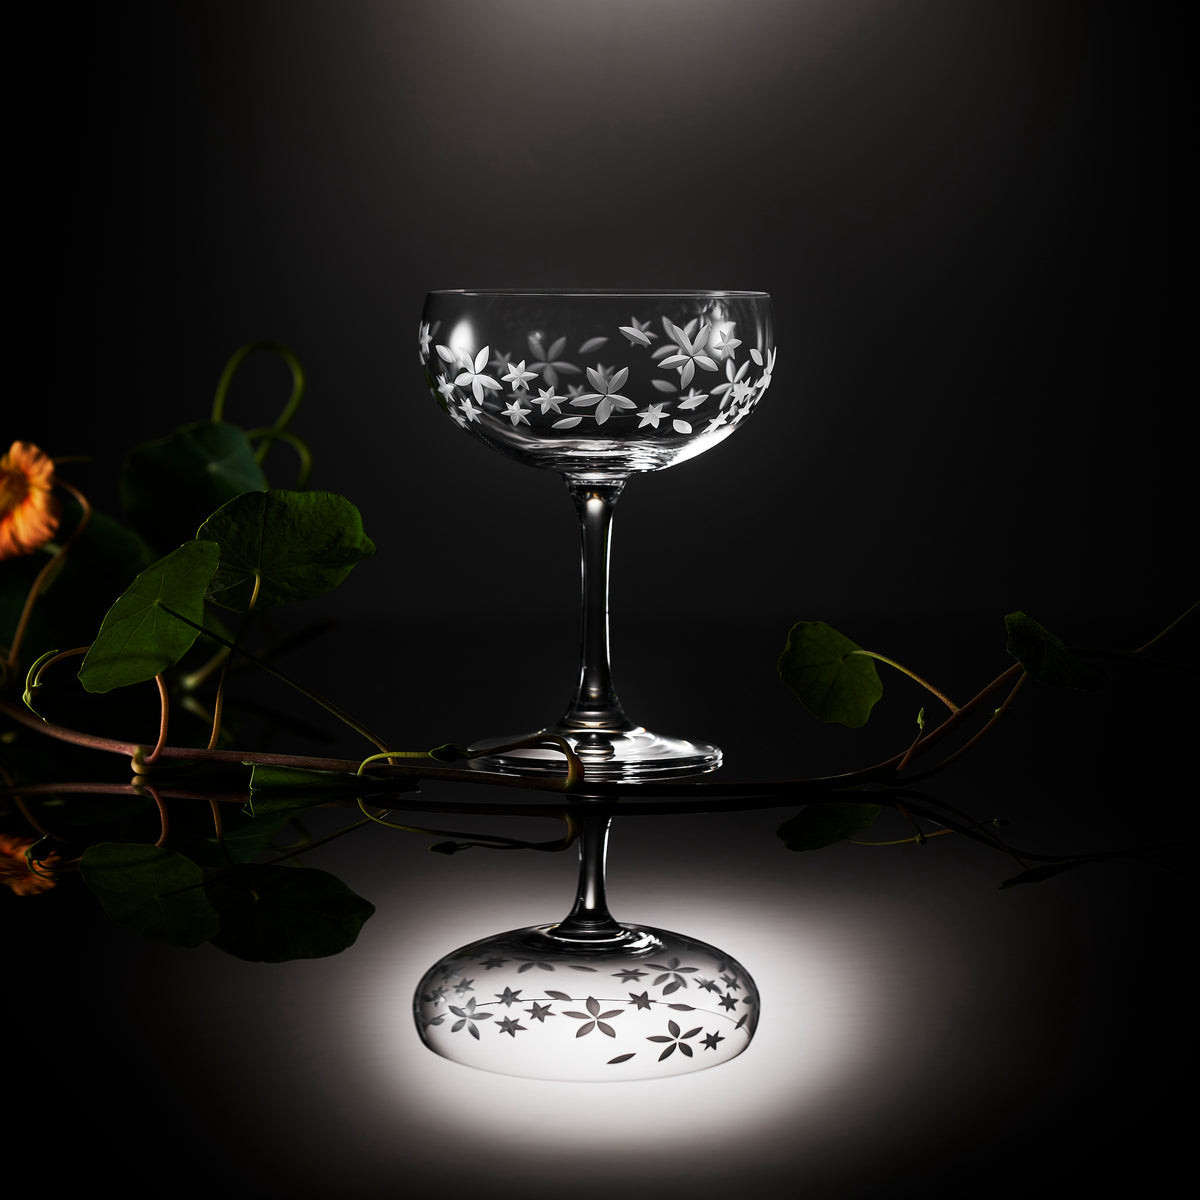 Chatham Bloom coupe cocktail glass, etched floral design in lead-free crystal by Caskata.